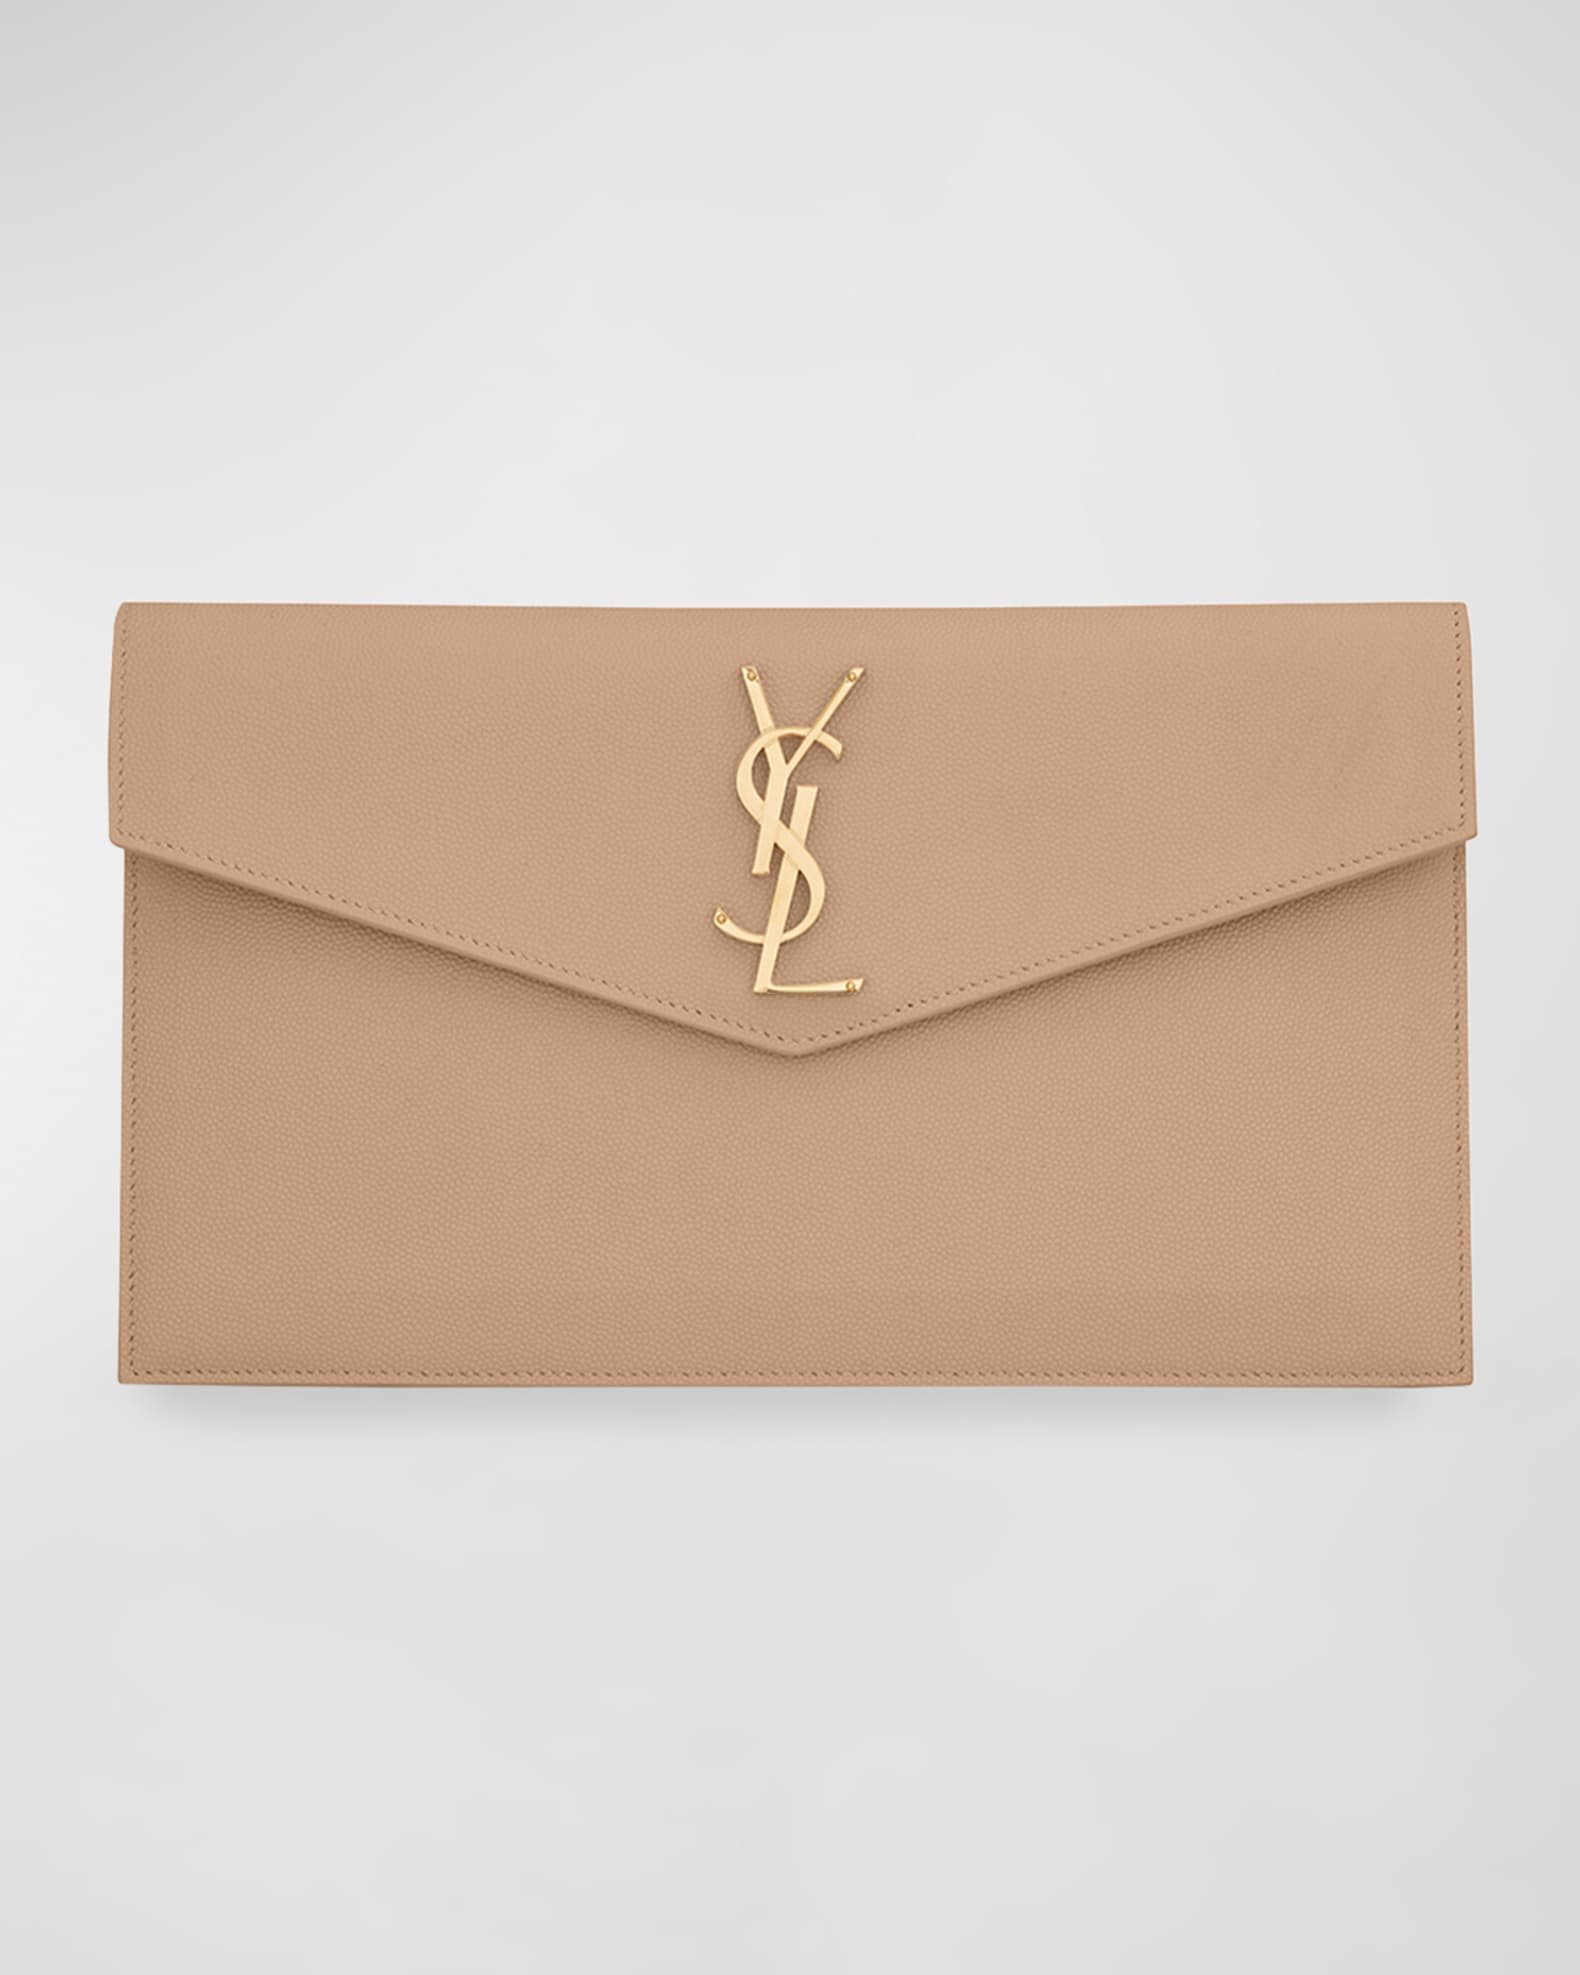 Saint Laurent Uptown YSL Pouch in Grained Leather | Neiman Marcus